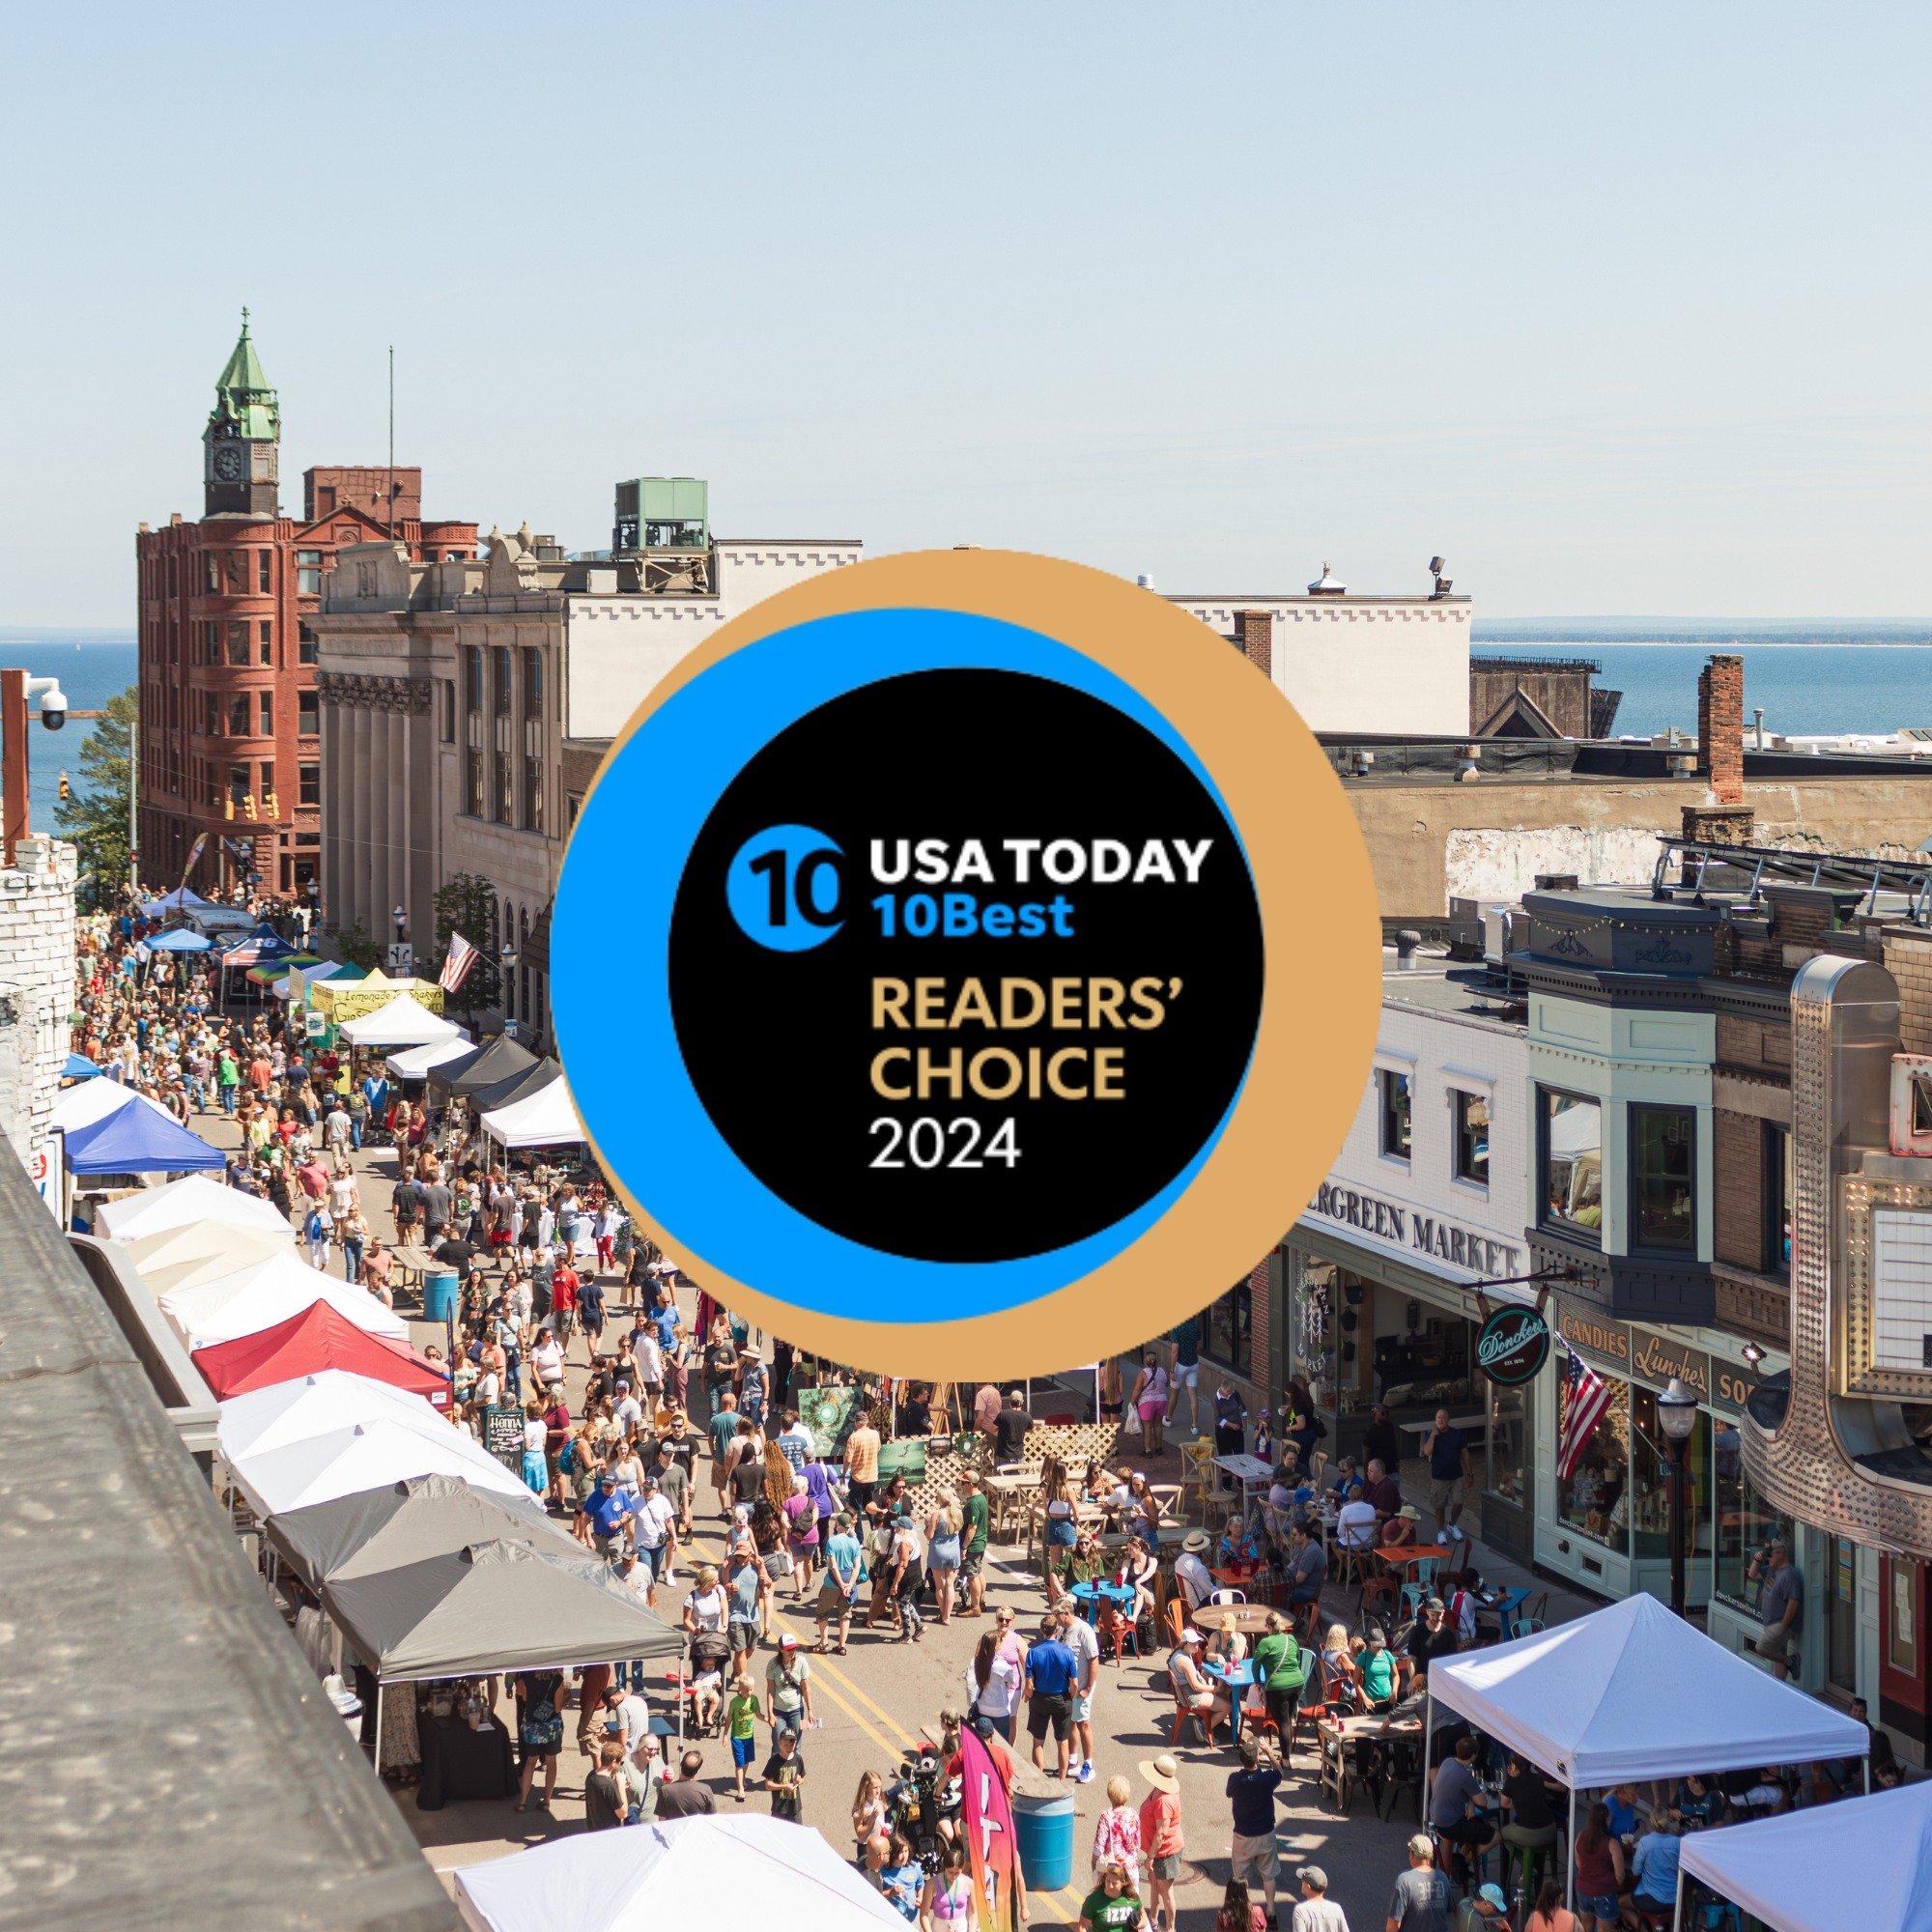 Let us cheer for Marquette being named one of USA Today's Ten best small-town cultural scenes in the country! 🎉🎨

Thank you to the voters for recognizing Marquette as not just a wonderful location for outdoor recreation, but also a center where art